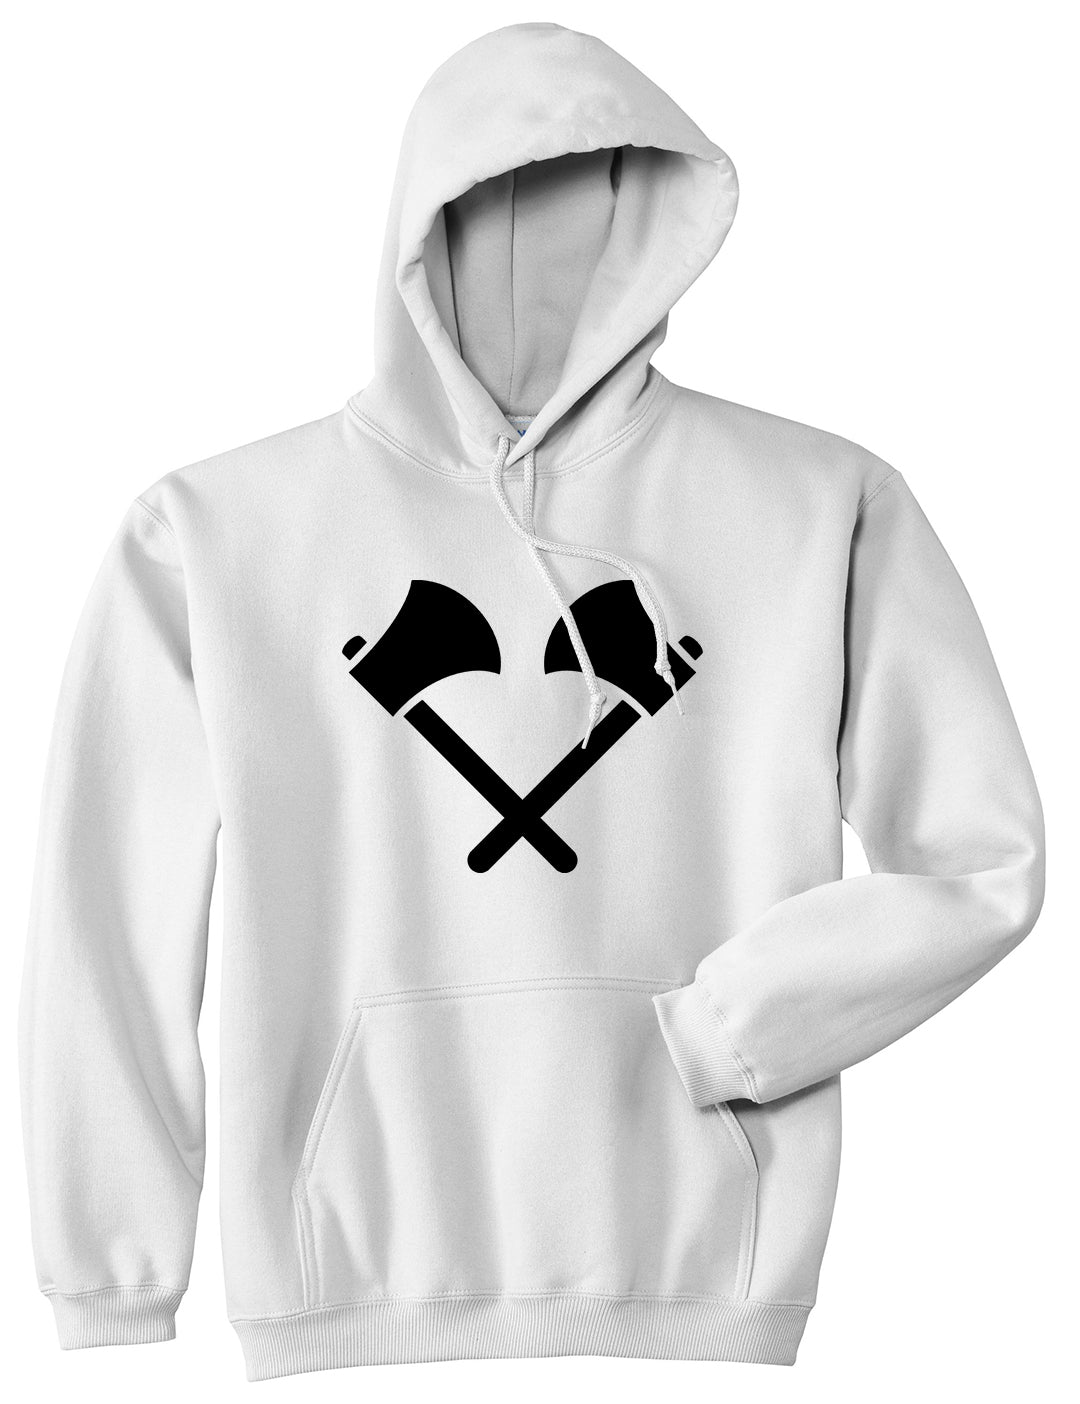 2 Ax Fireman Logo White Pullover Hoodie by Kings Of NY